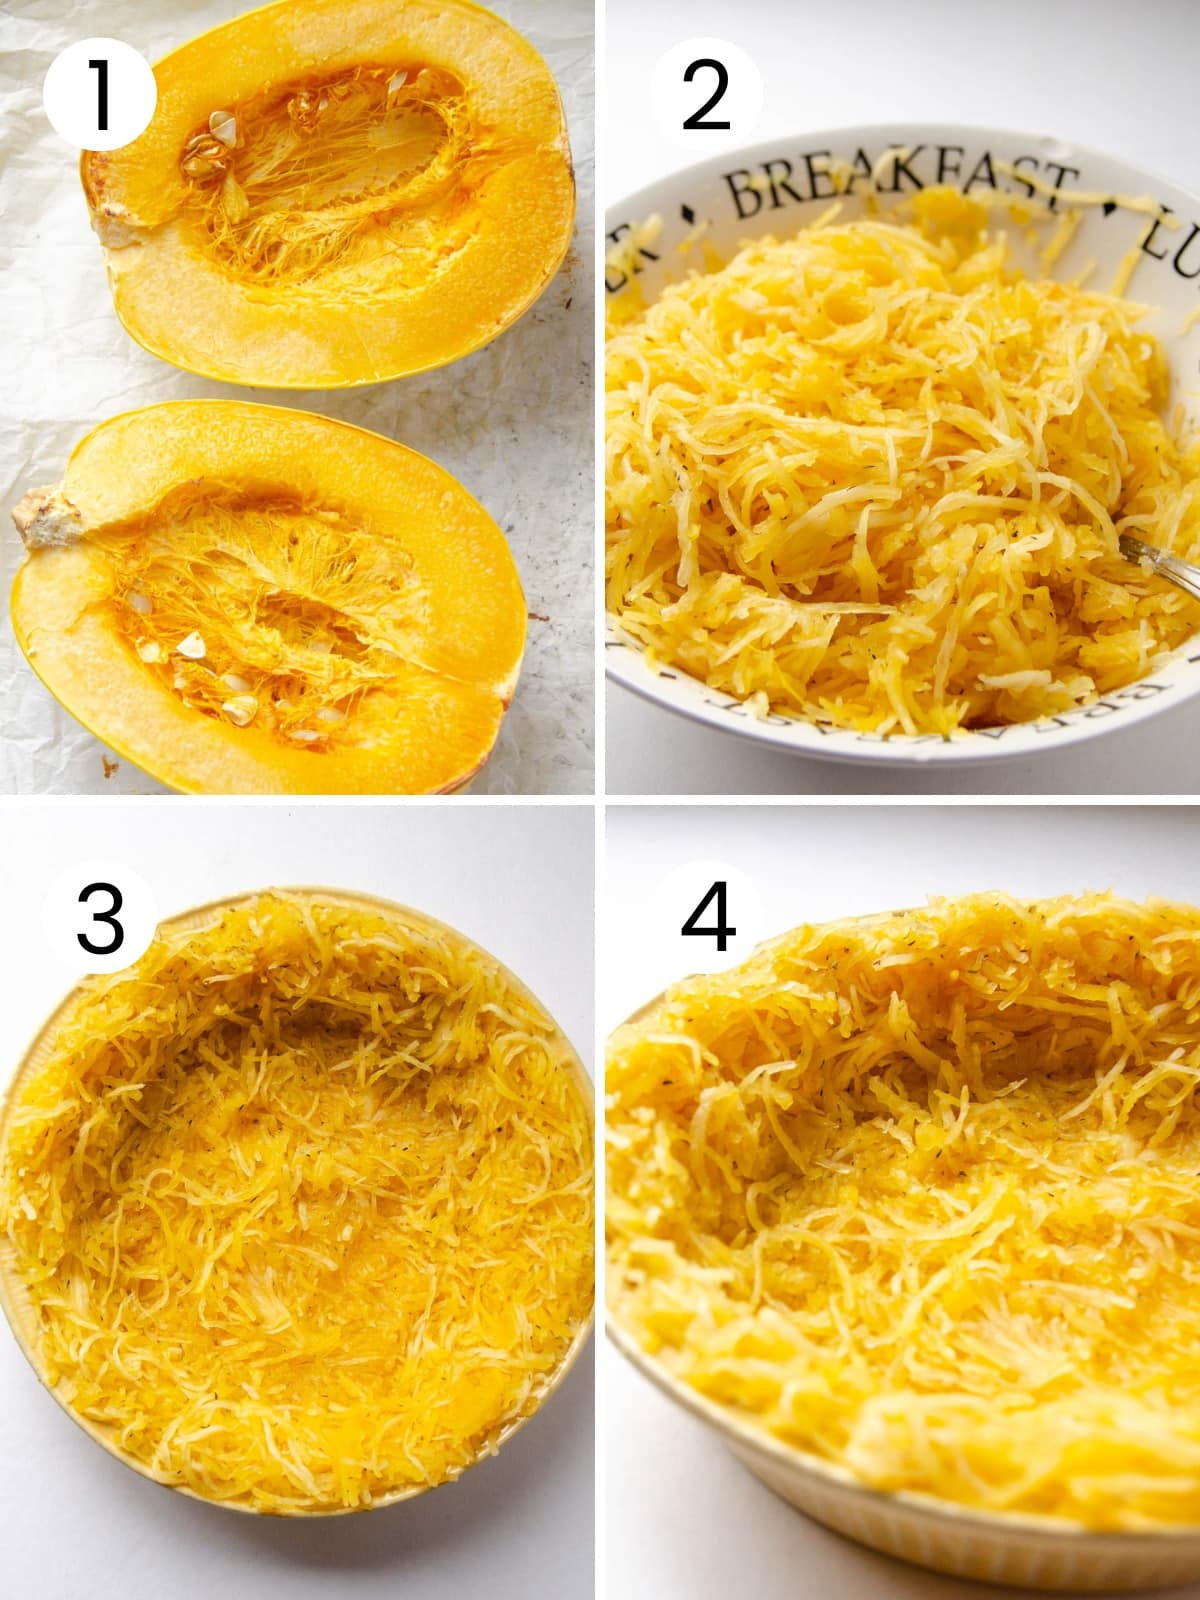 How to separate cooked spaghetti squash into strands and make quiche crust with it.